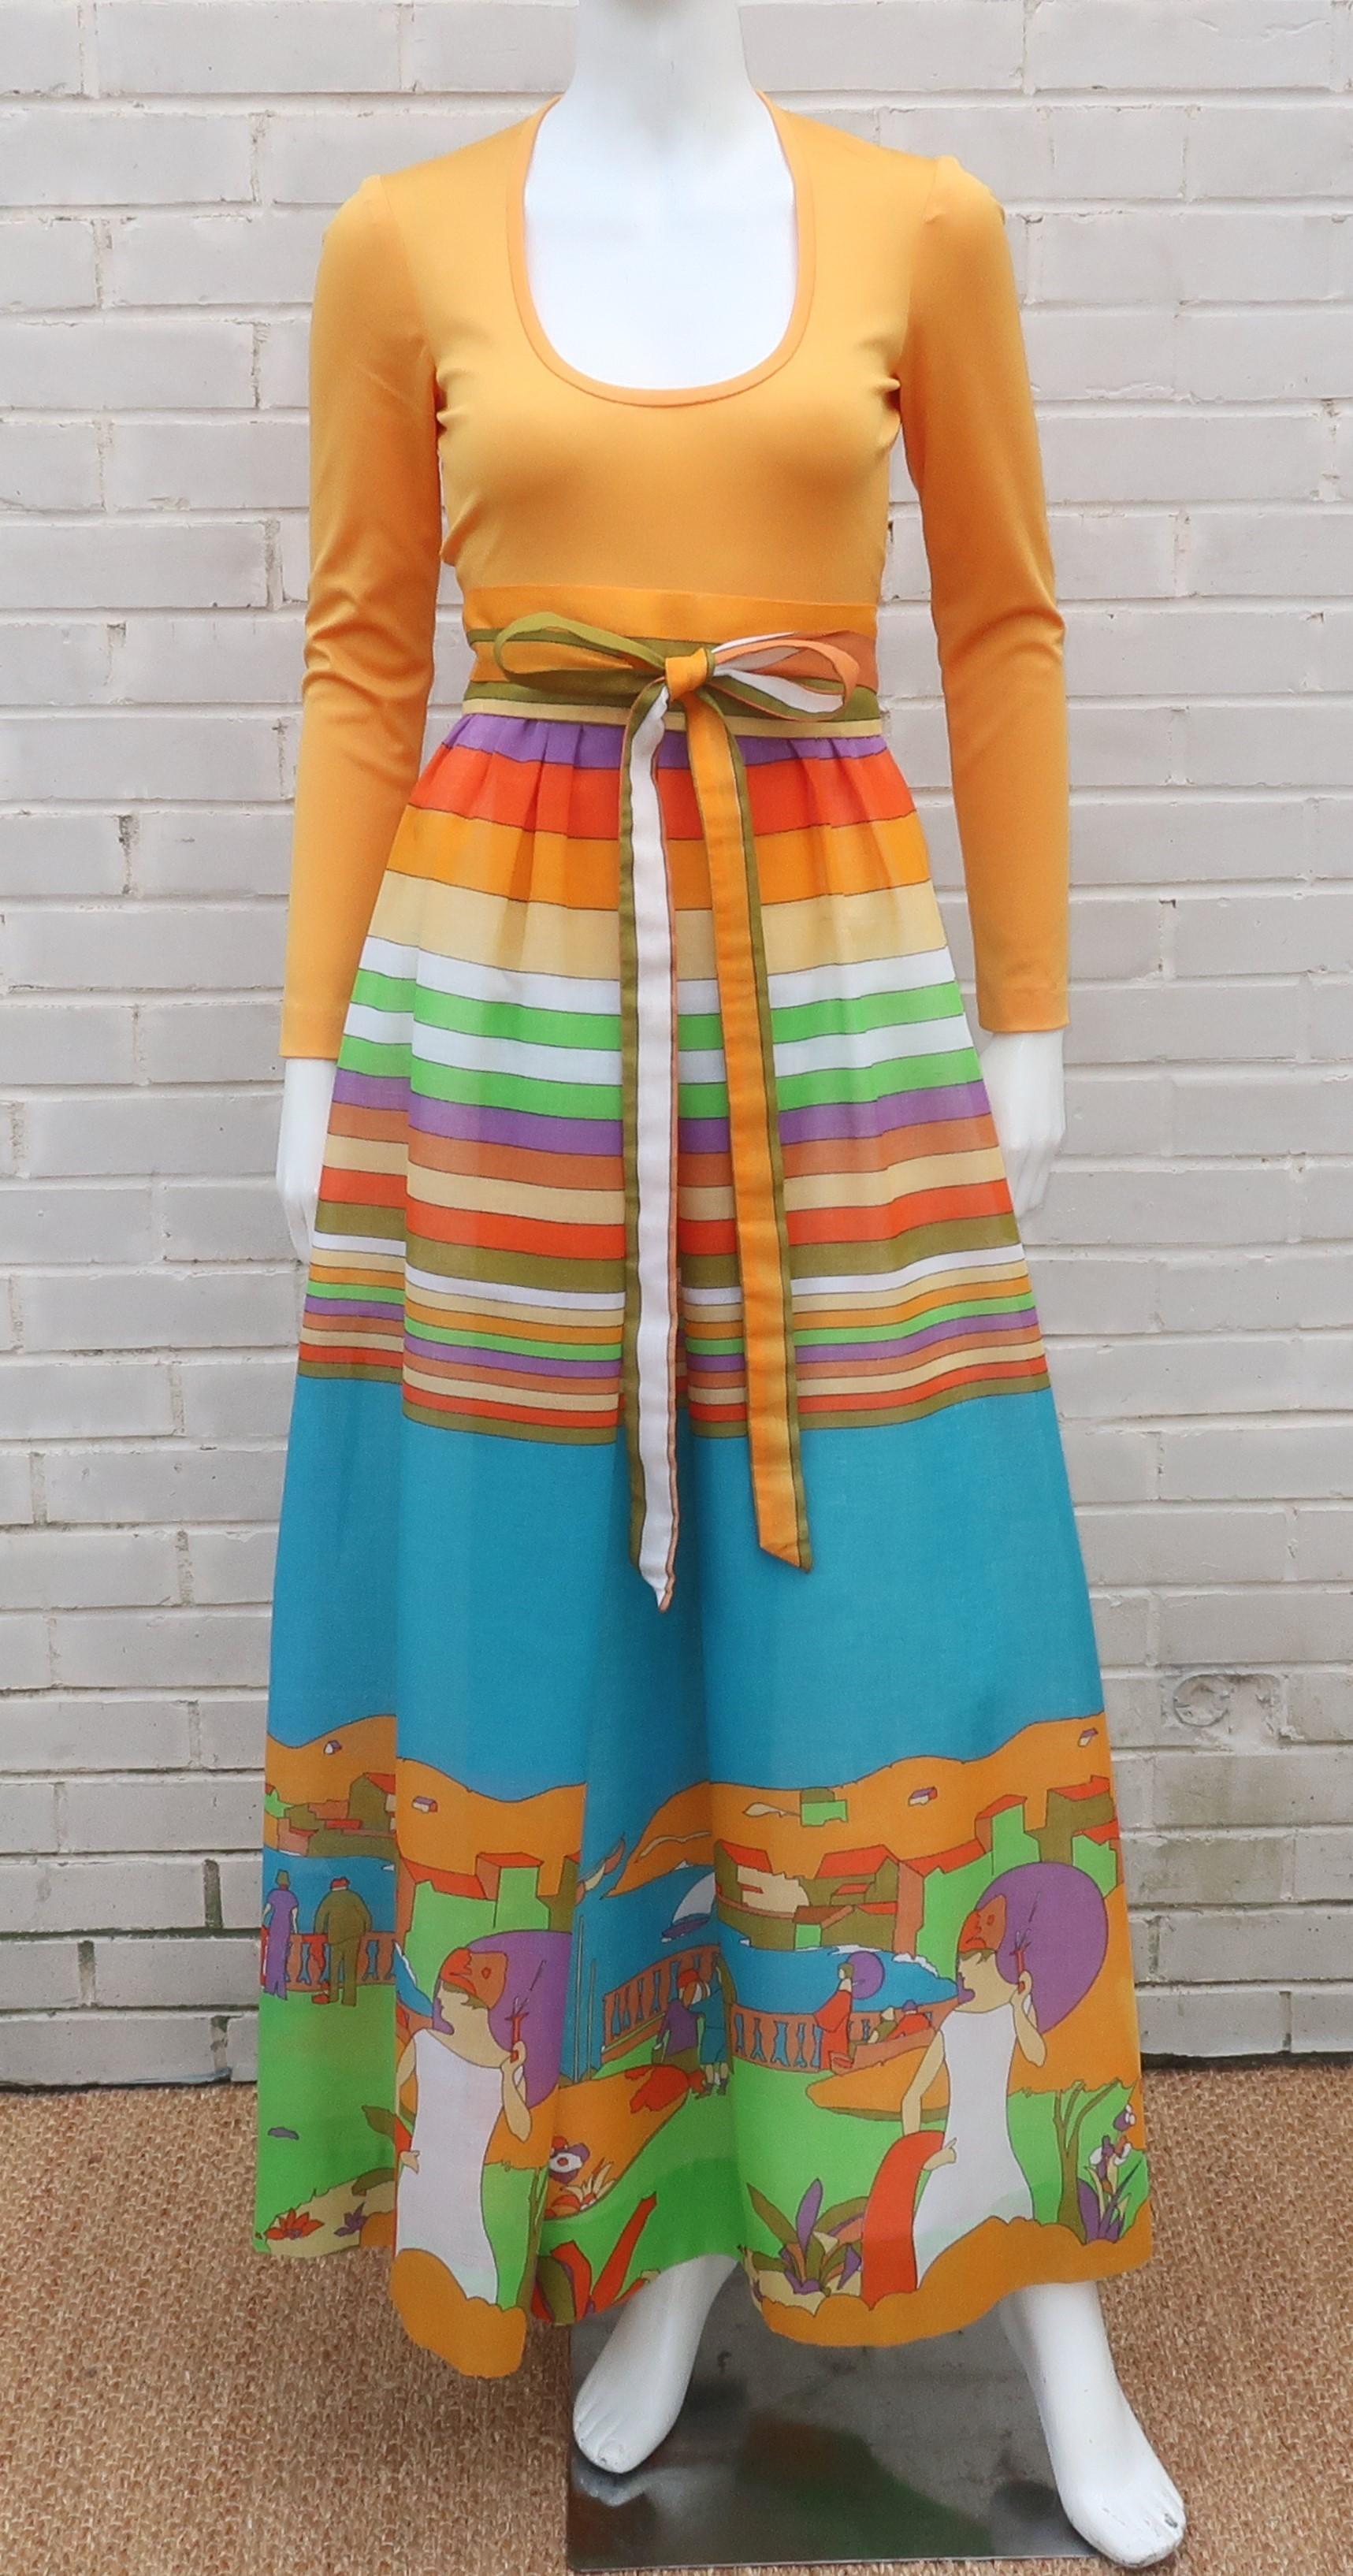 1970's Lillie Rubin Collection 700 maxi dress with an orange sherbet color jersey bodice and a gauzy cotton blend fabric skirt with an Art Deco revival print displaying shades of orange, green, purple, yellow, red and aqua blue.  The dress zips and